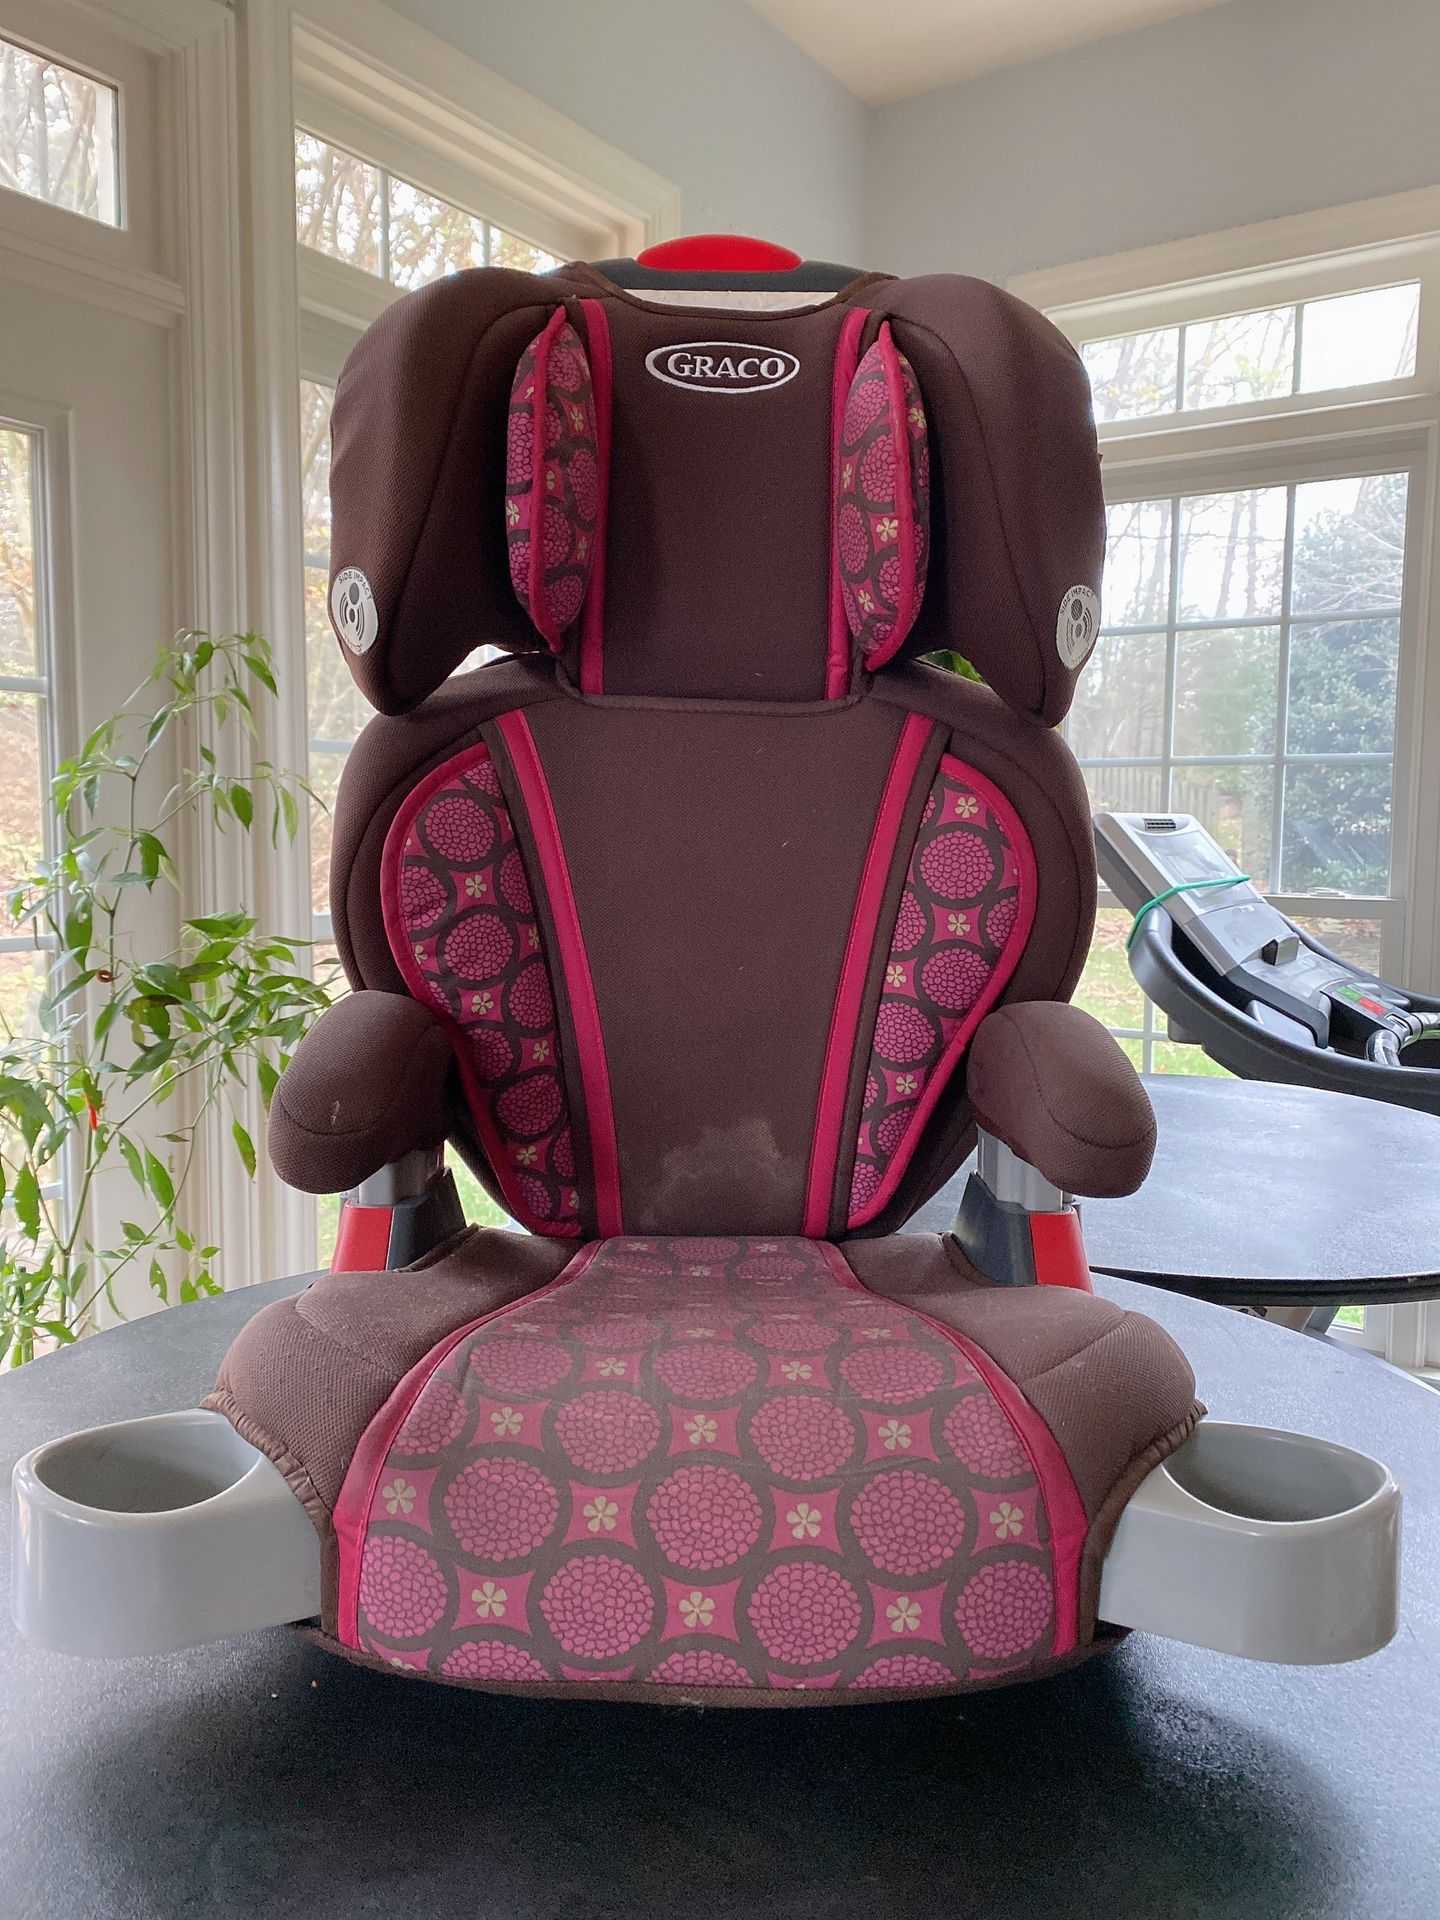 GRACO Booster Car Seat